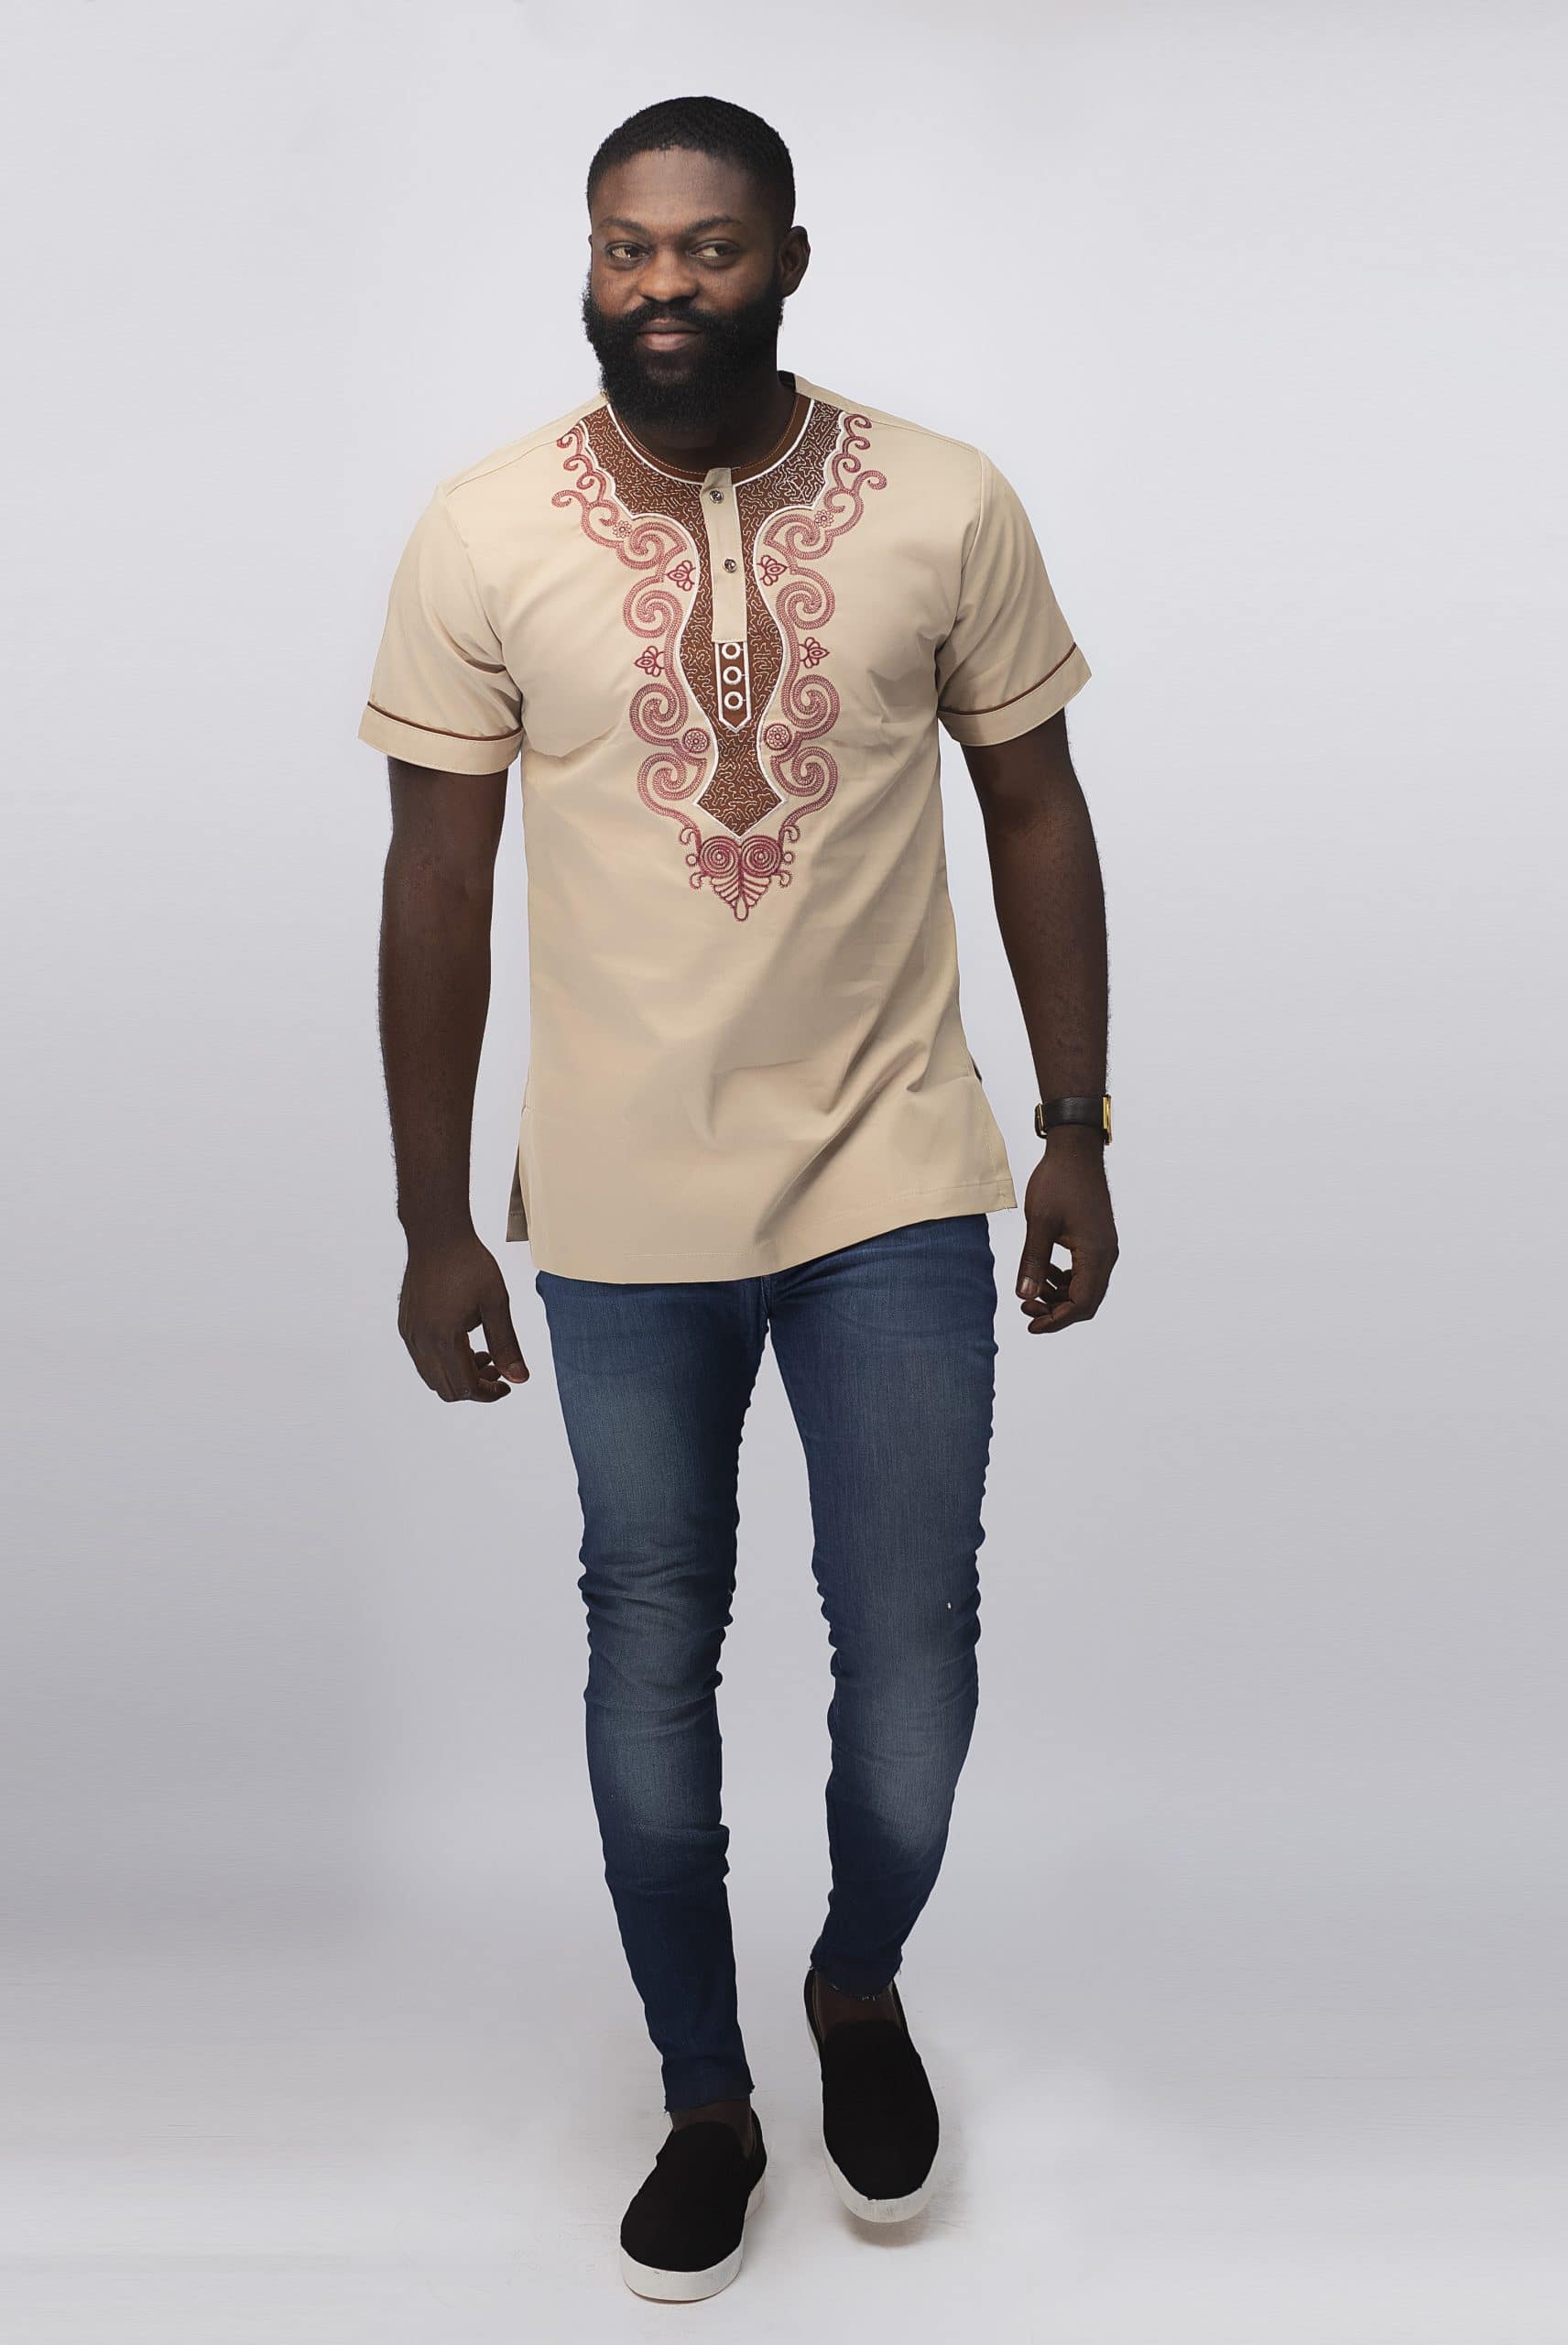 Frontal of model wearing our Melange Slim Fit Embroidered African Shirt in cream with elaborate red embroidery.